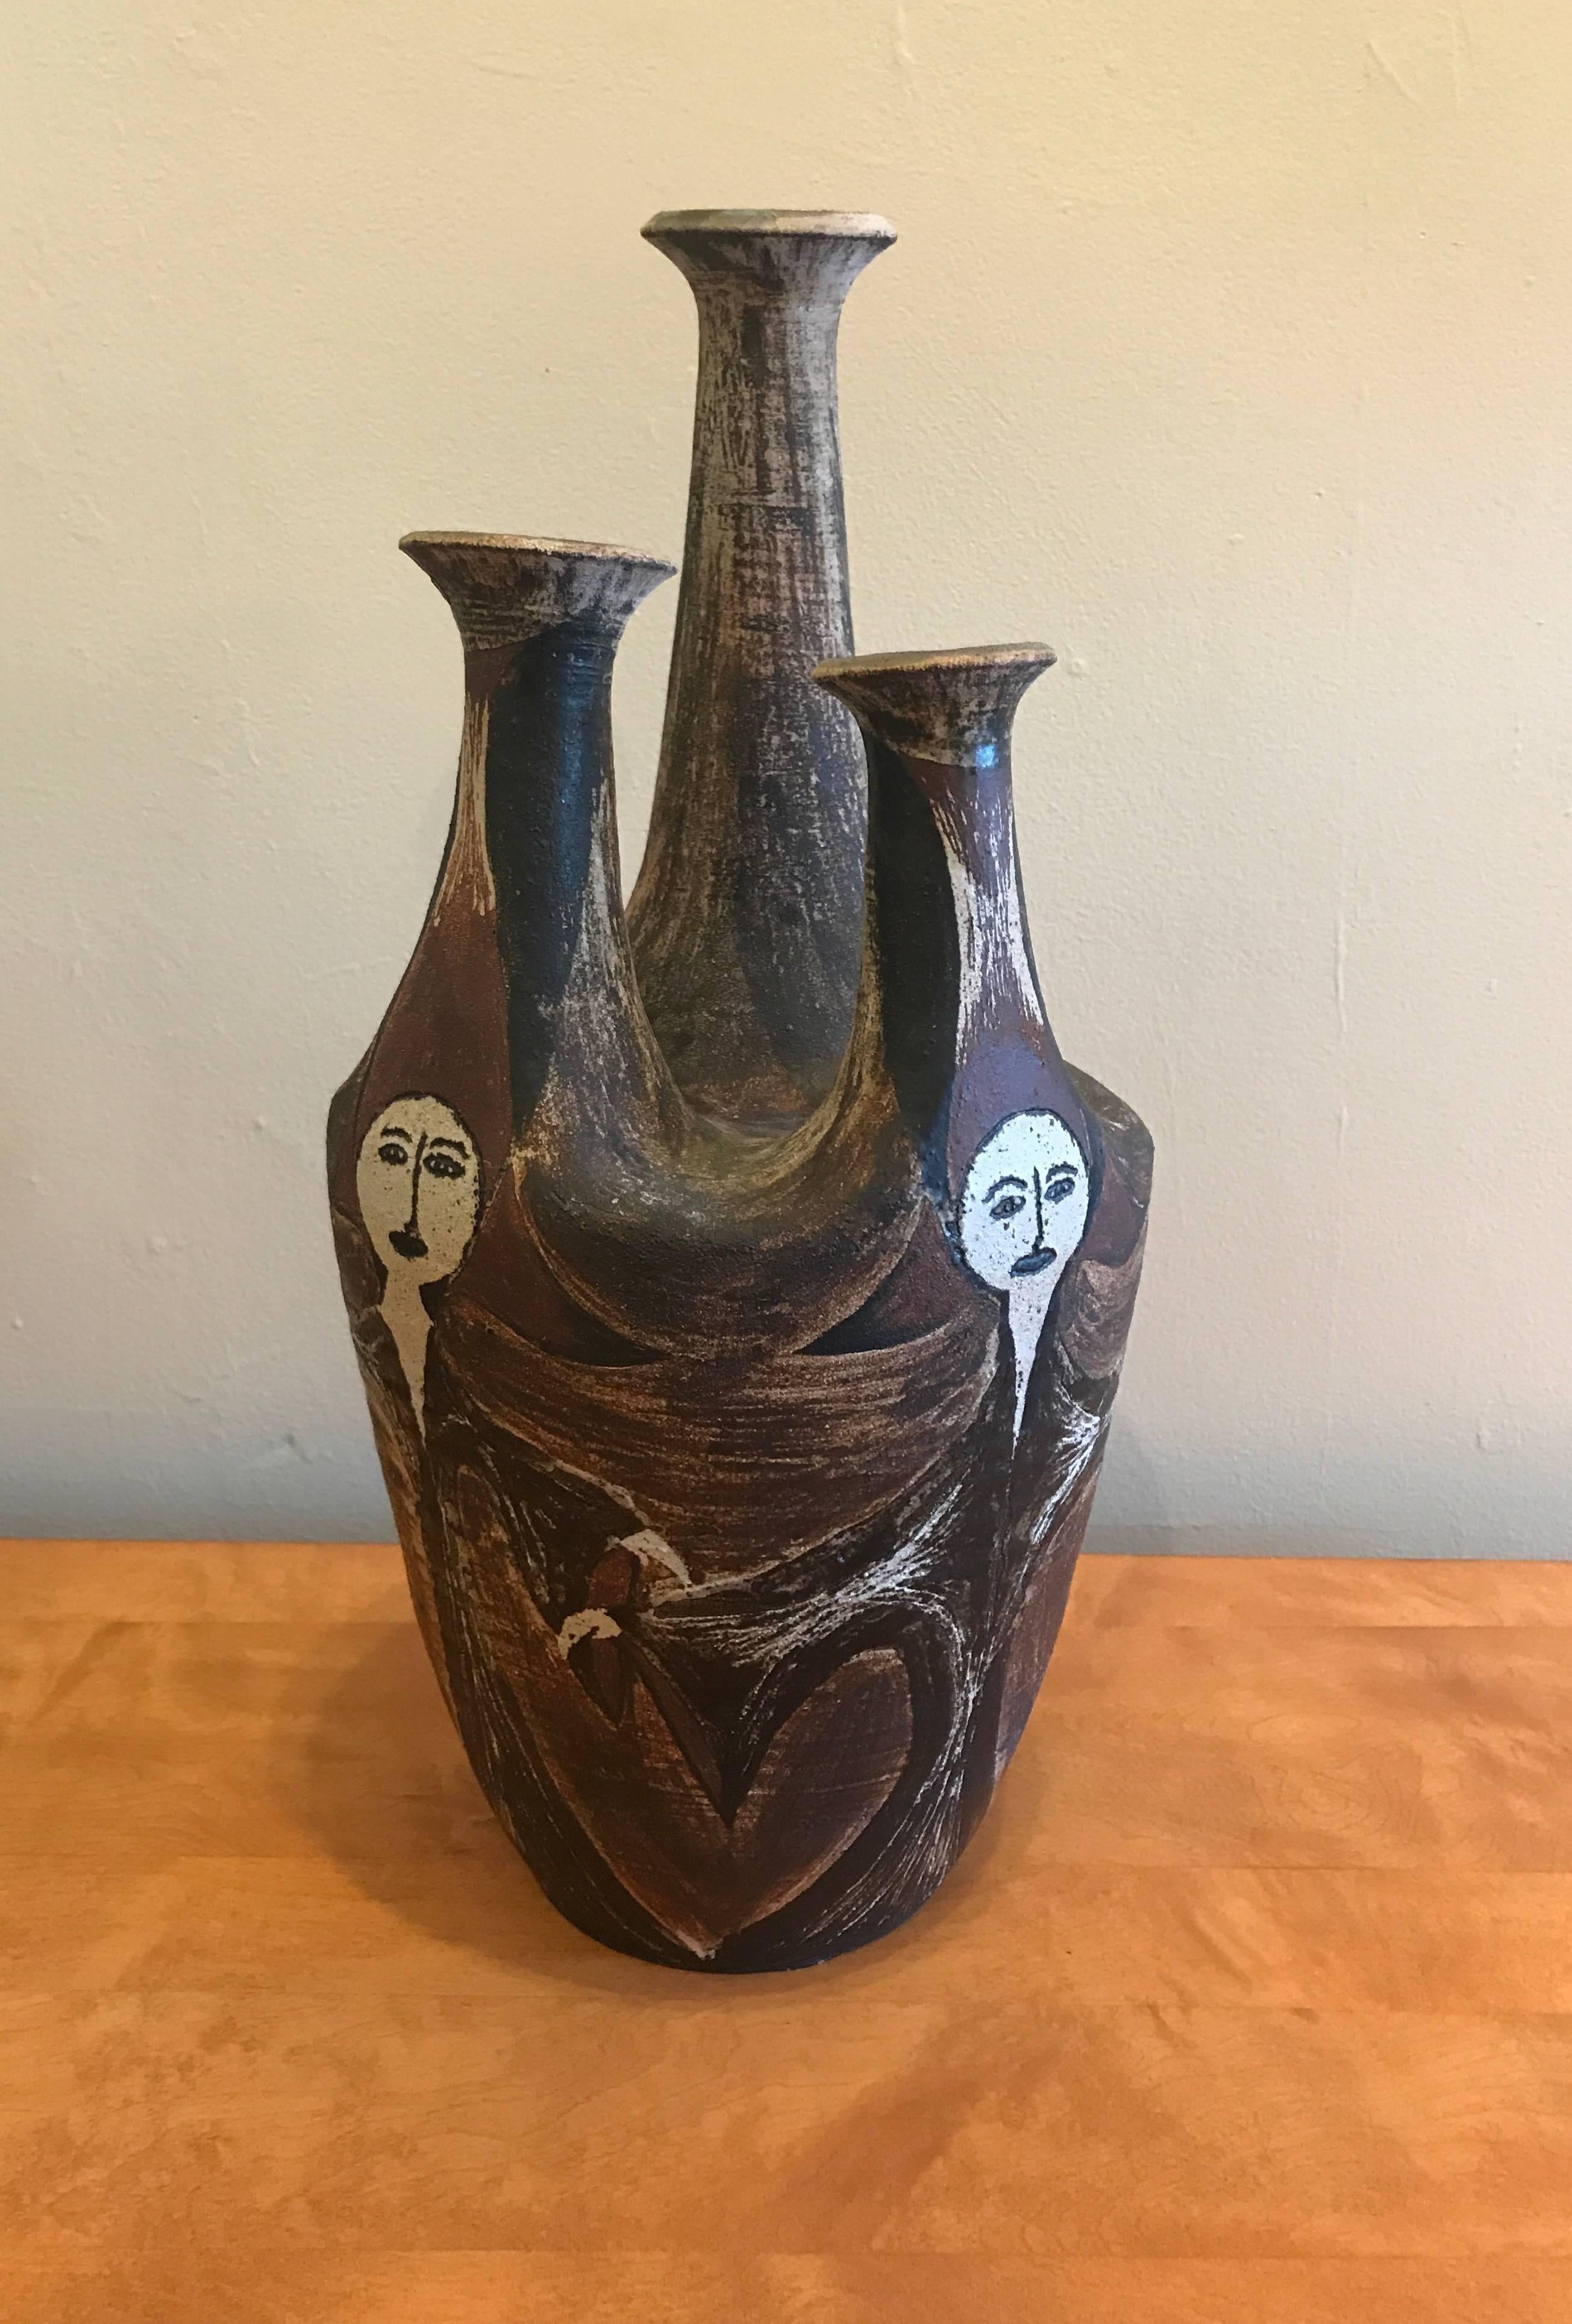 Ceramic artist Joseph Hysong (1925-2008) three spout vessel with three female figures glaze applied and etched onto the clay, the color of the glaze is a mixture of various earth tones. Joseph Hysong started the ceramics program at Monterey